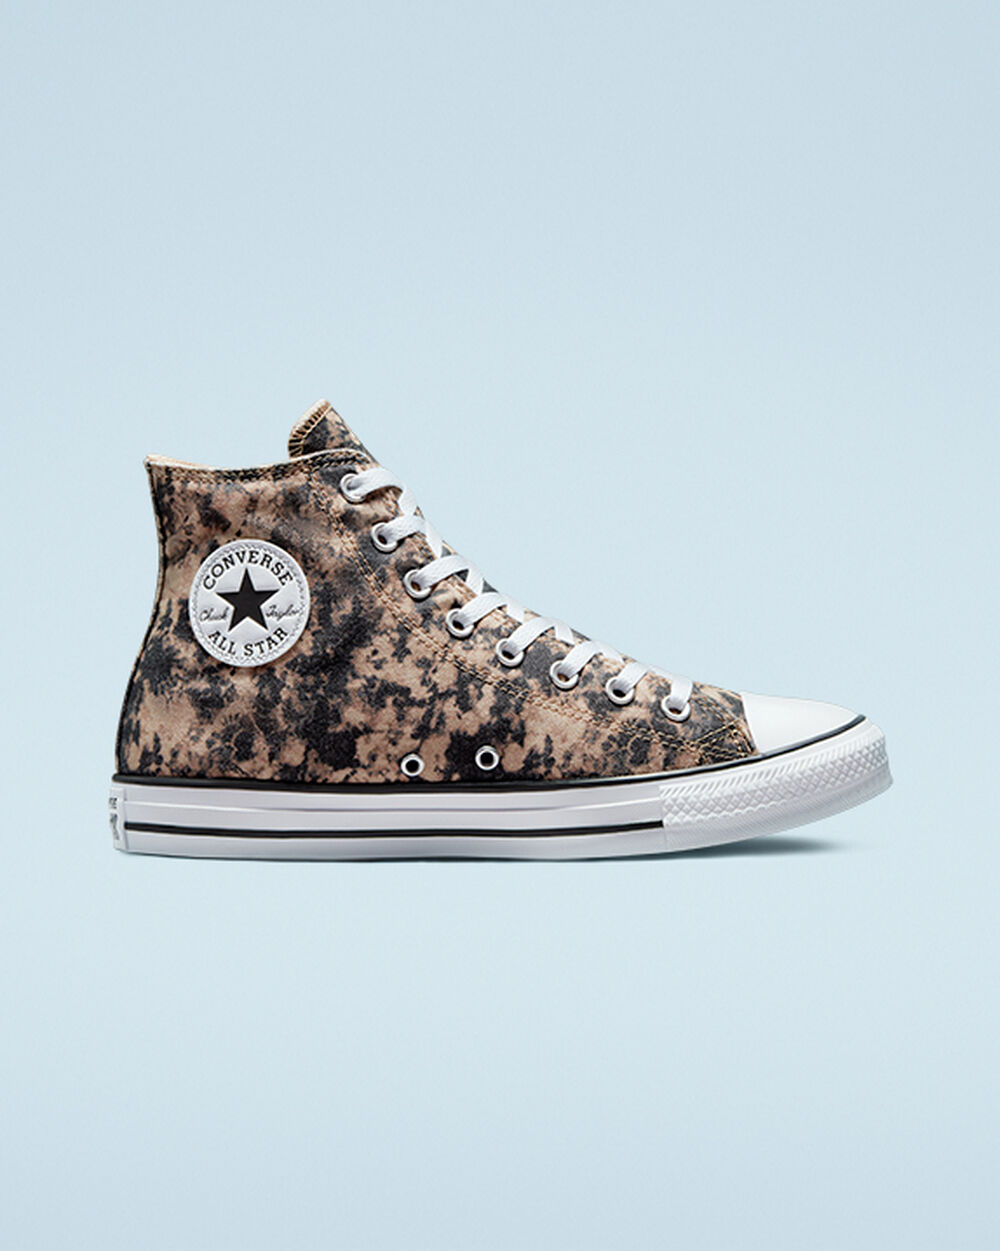 Tenis Converse Chuck Taylor All Star Mujer Negros Grises Blancos | Mexico-465136